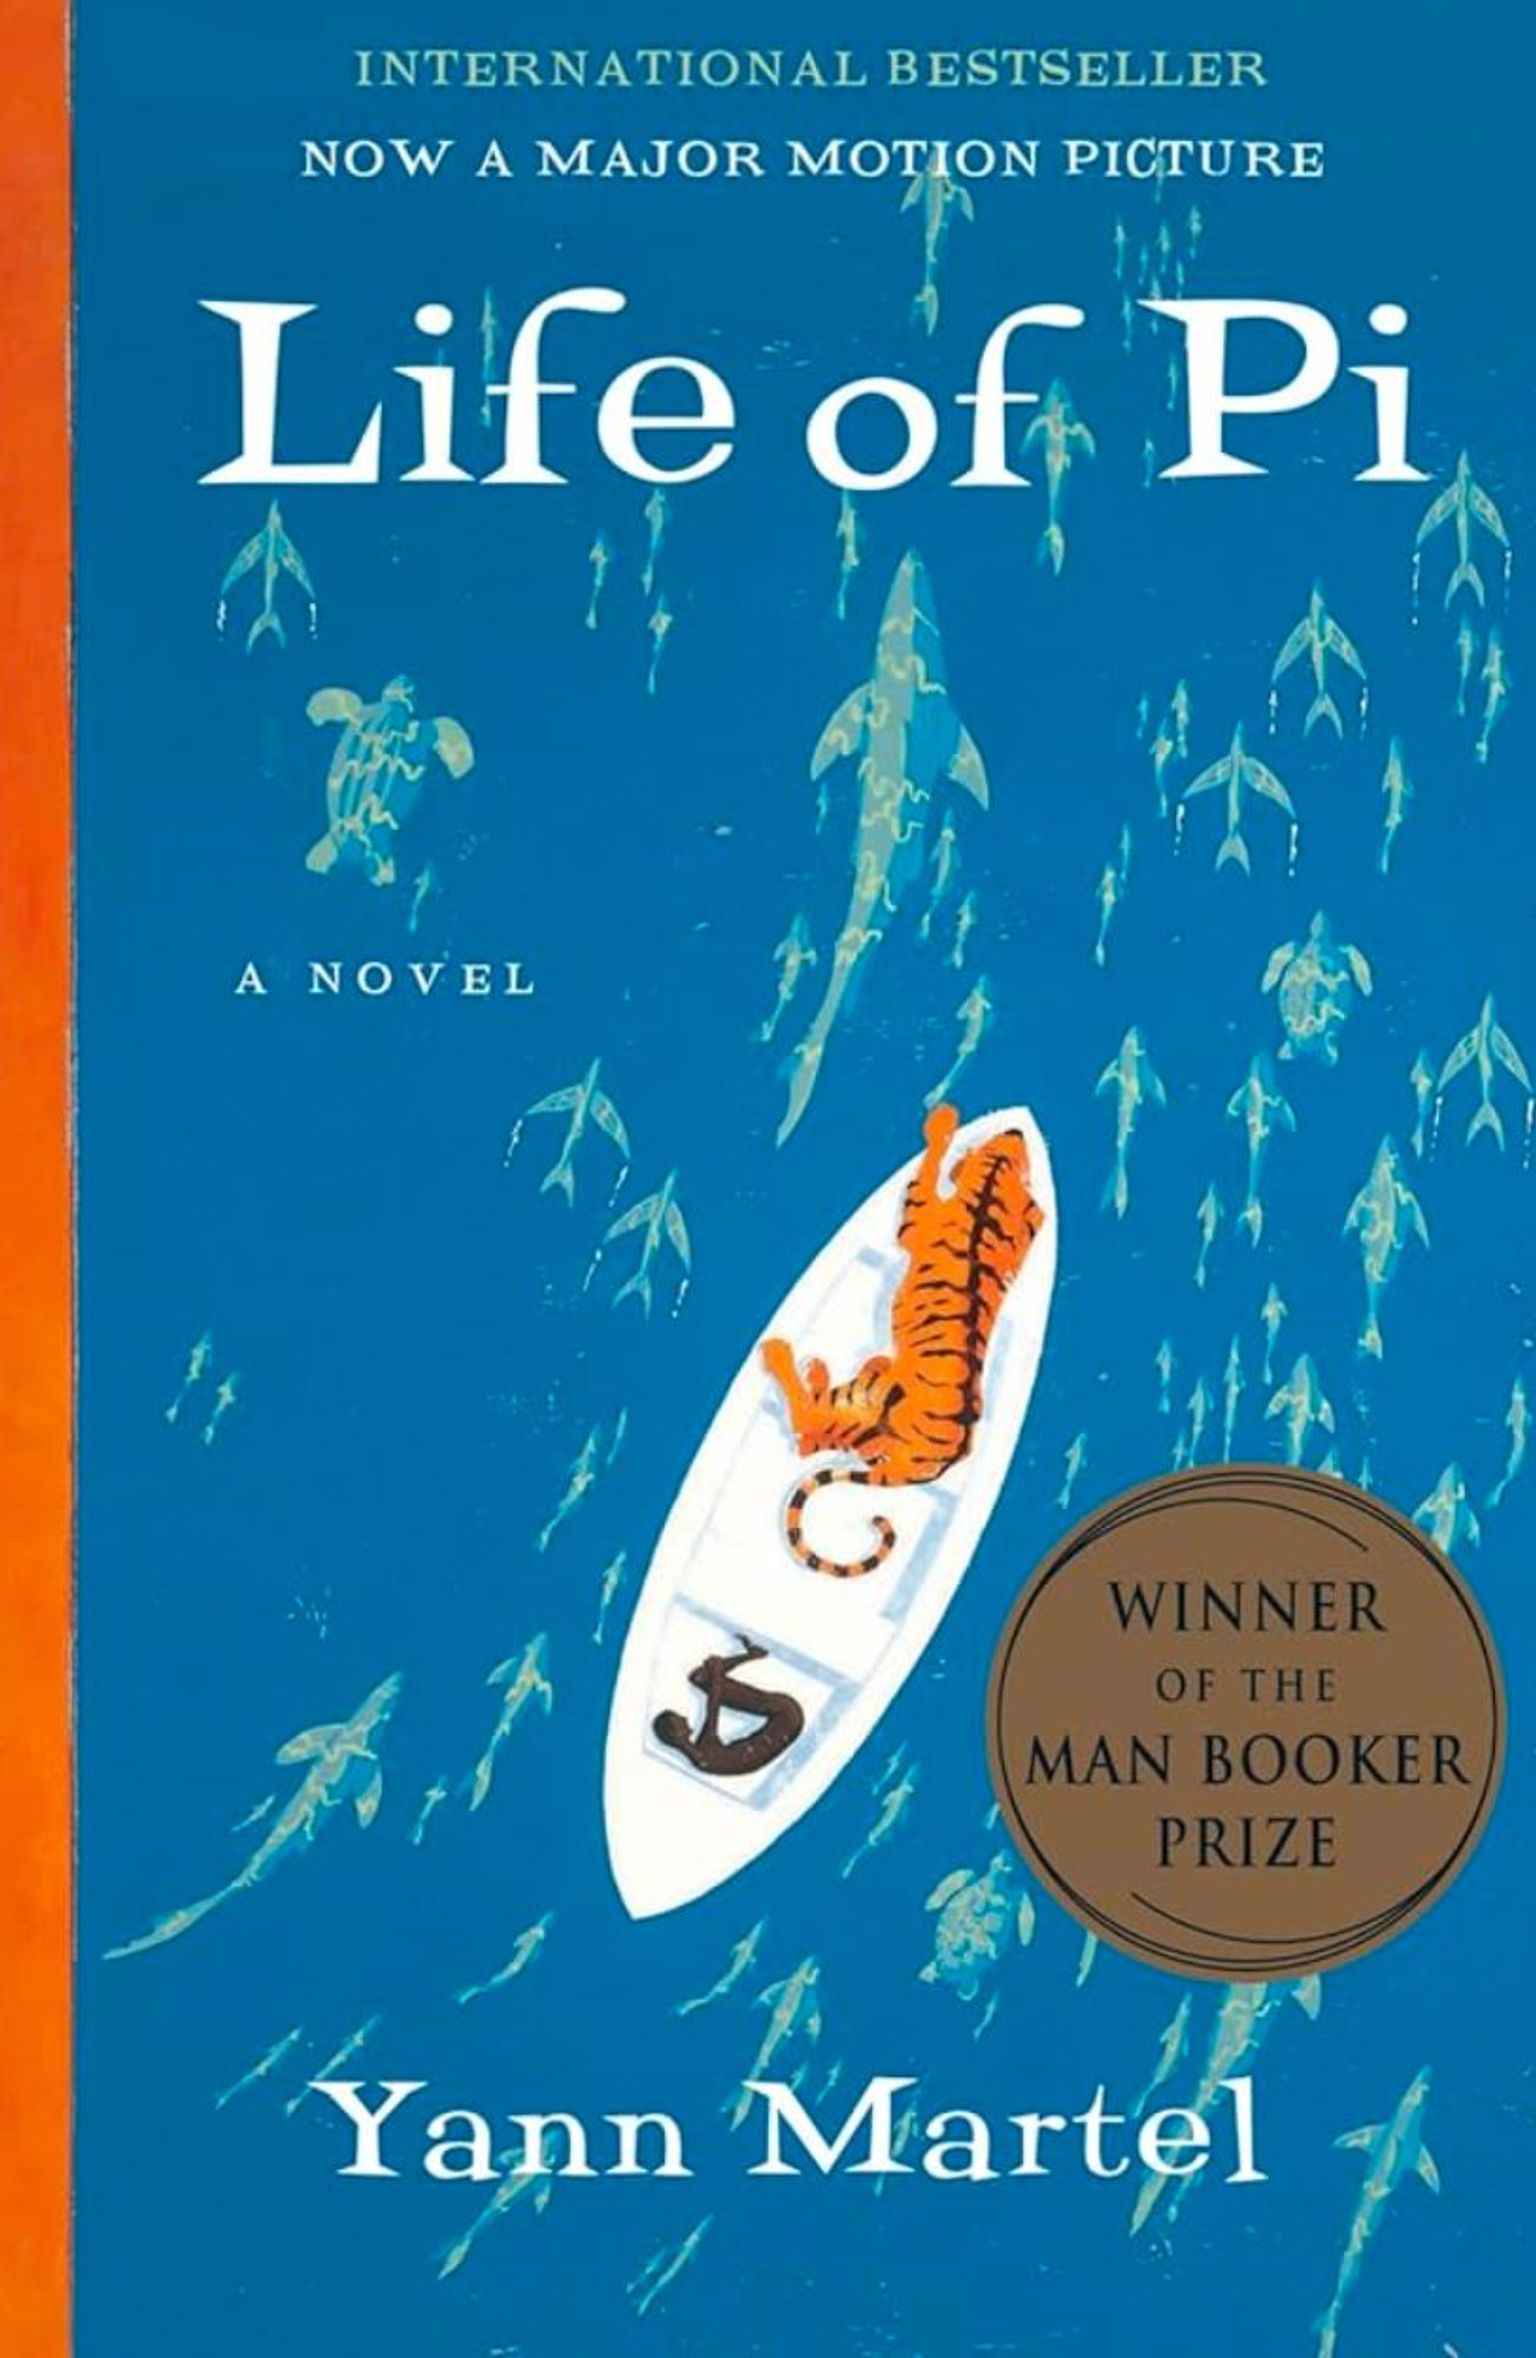 Book Recommendations - Life of Pi